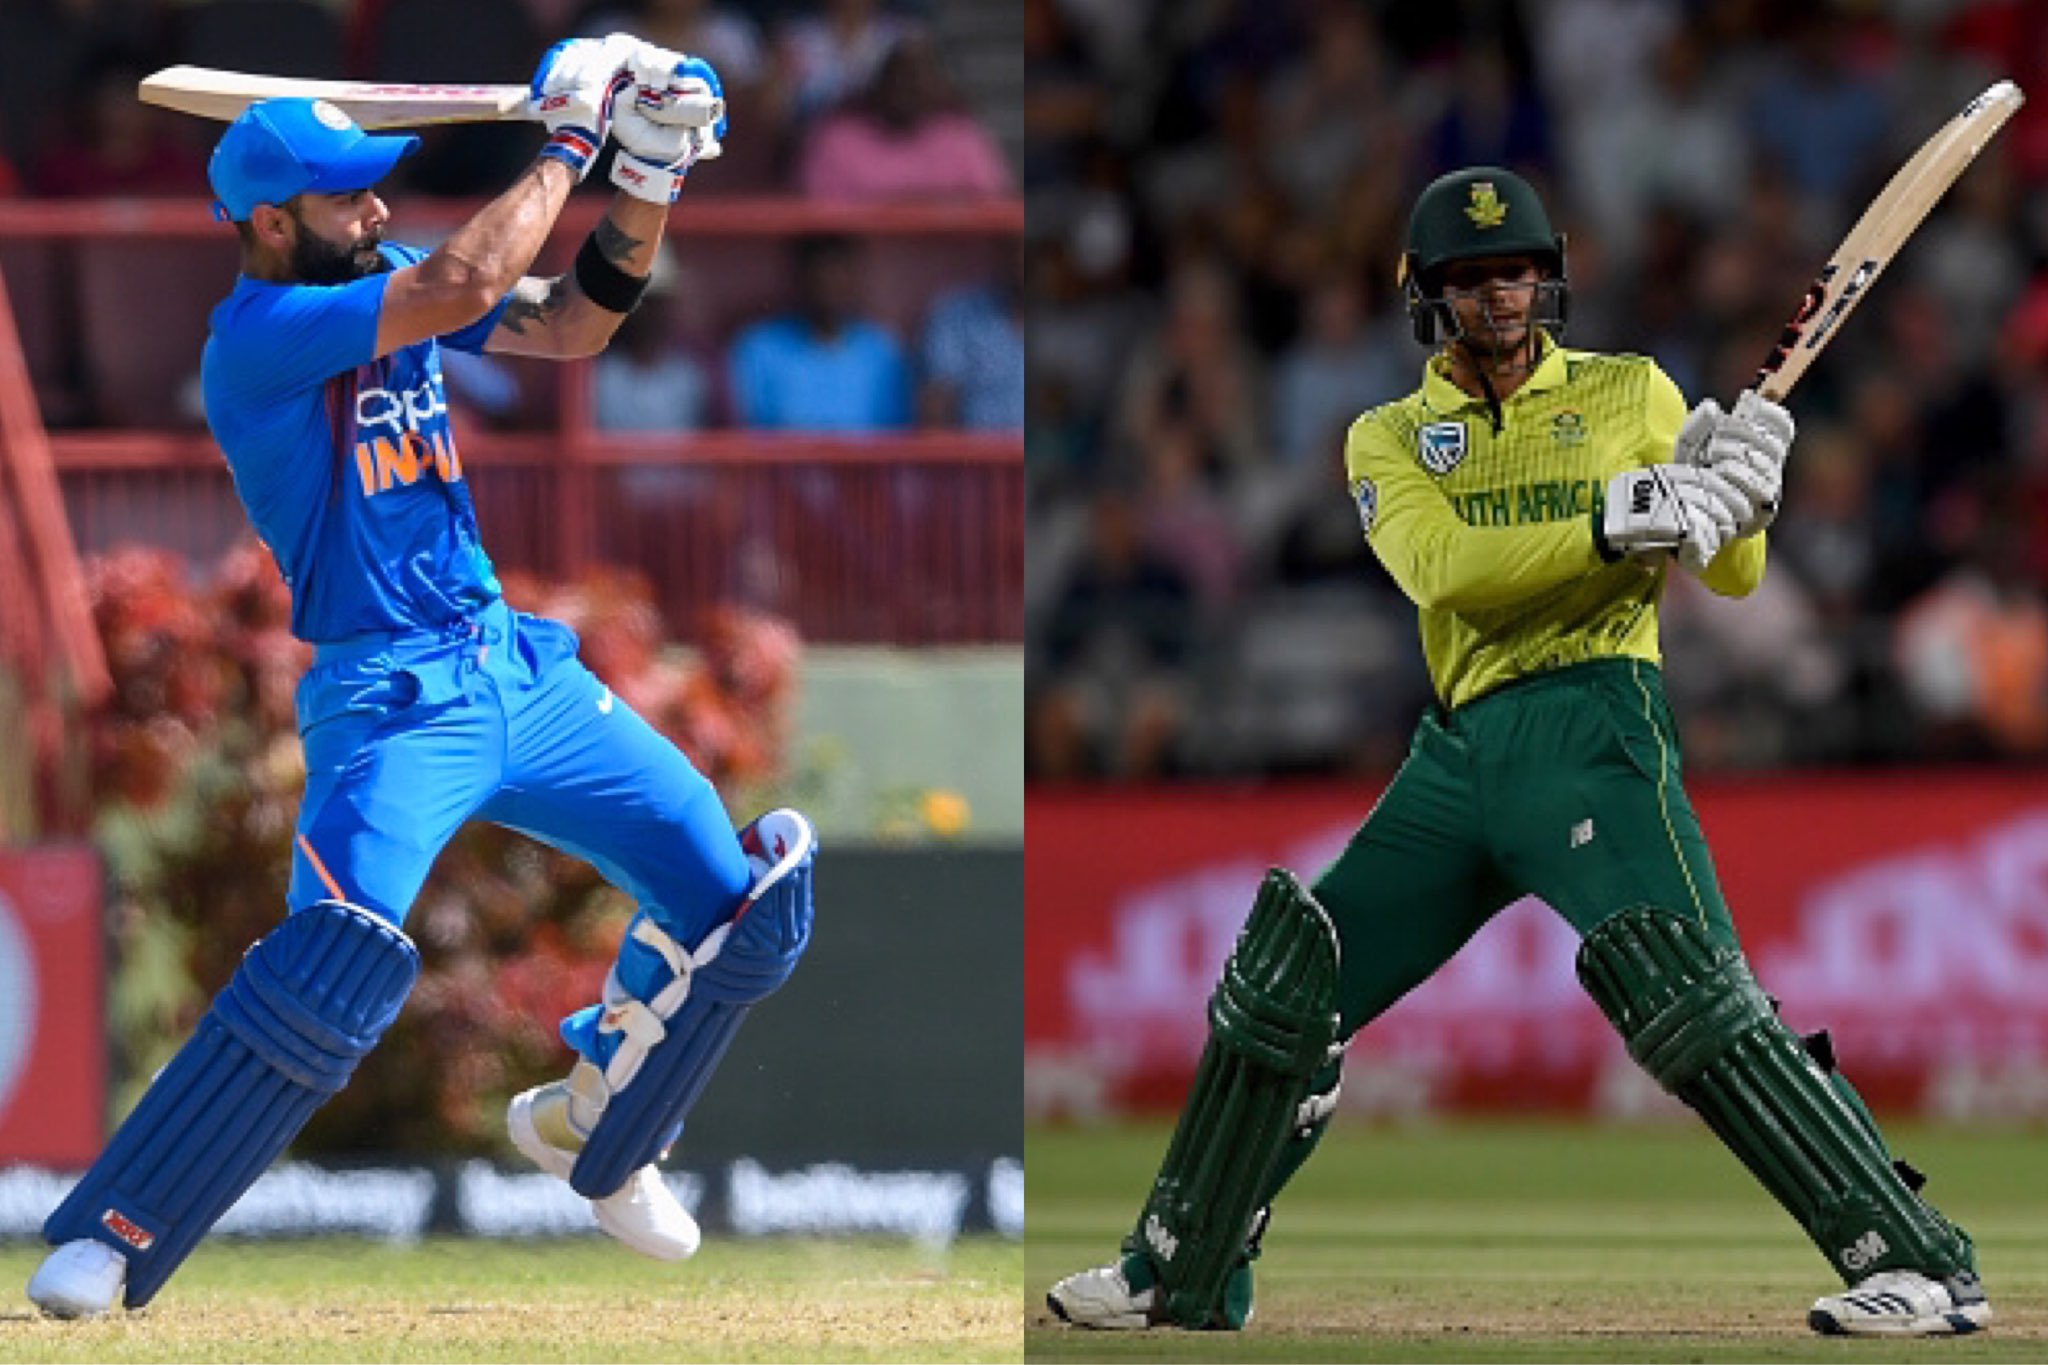 India will play three T20Is against South Africa starting from September 15